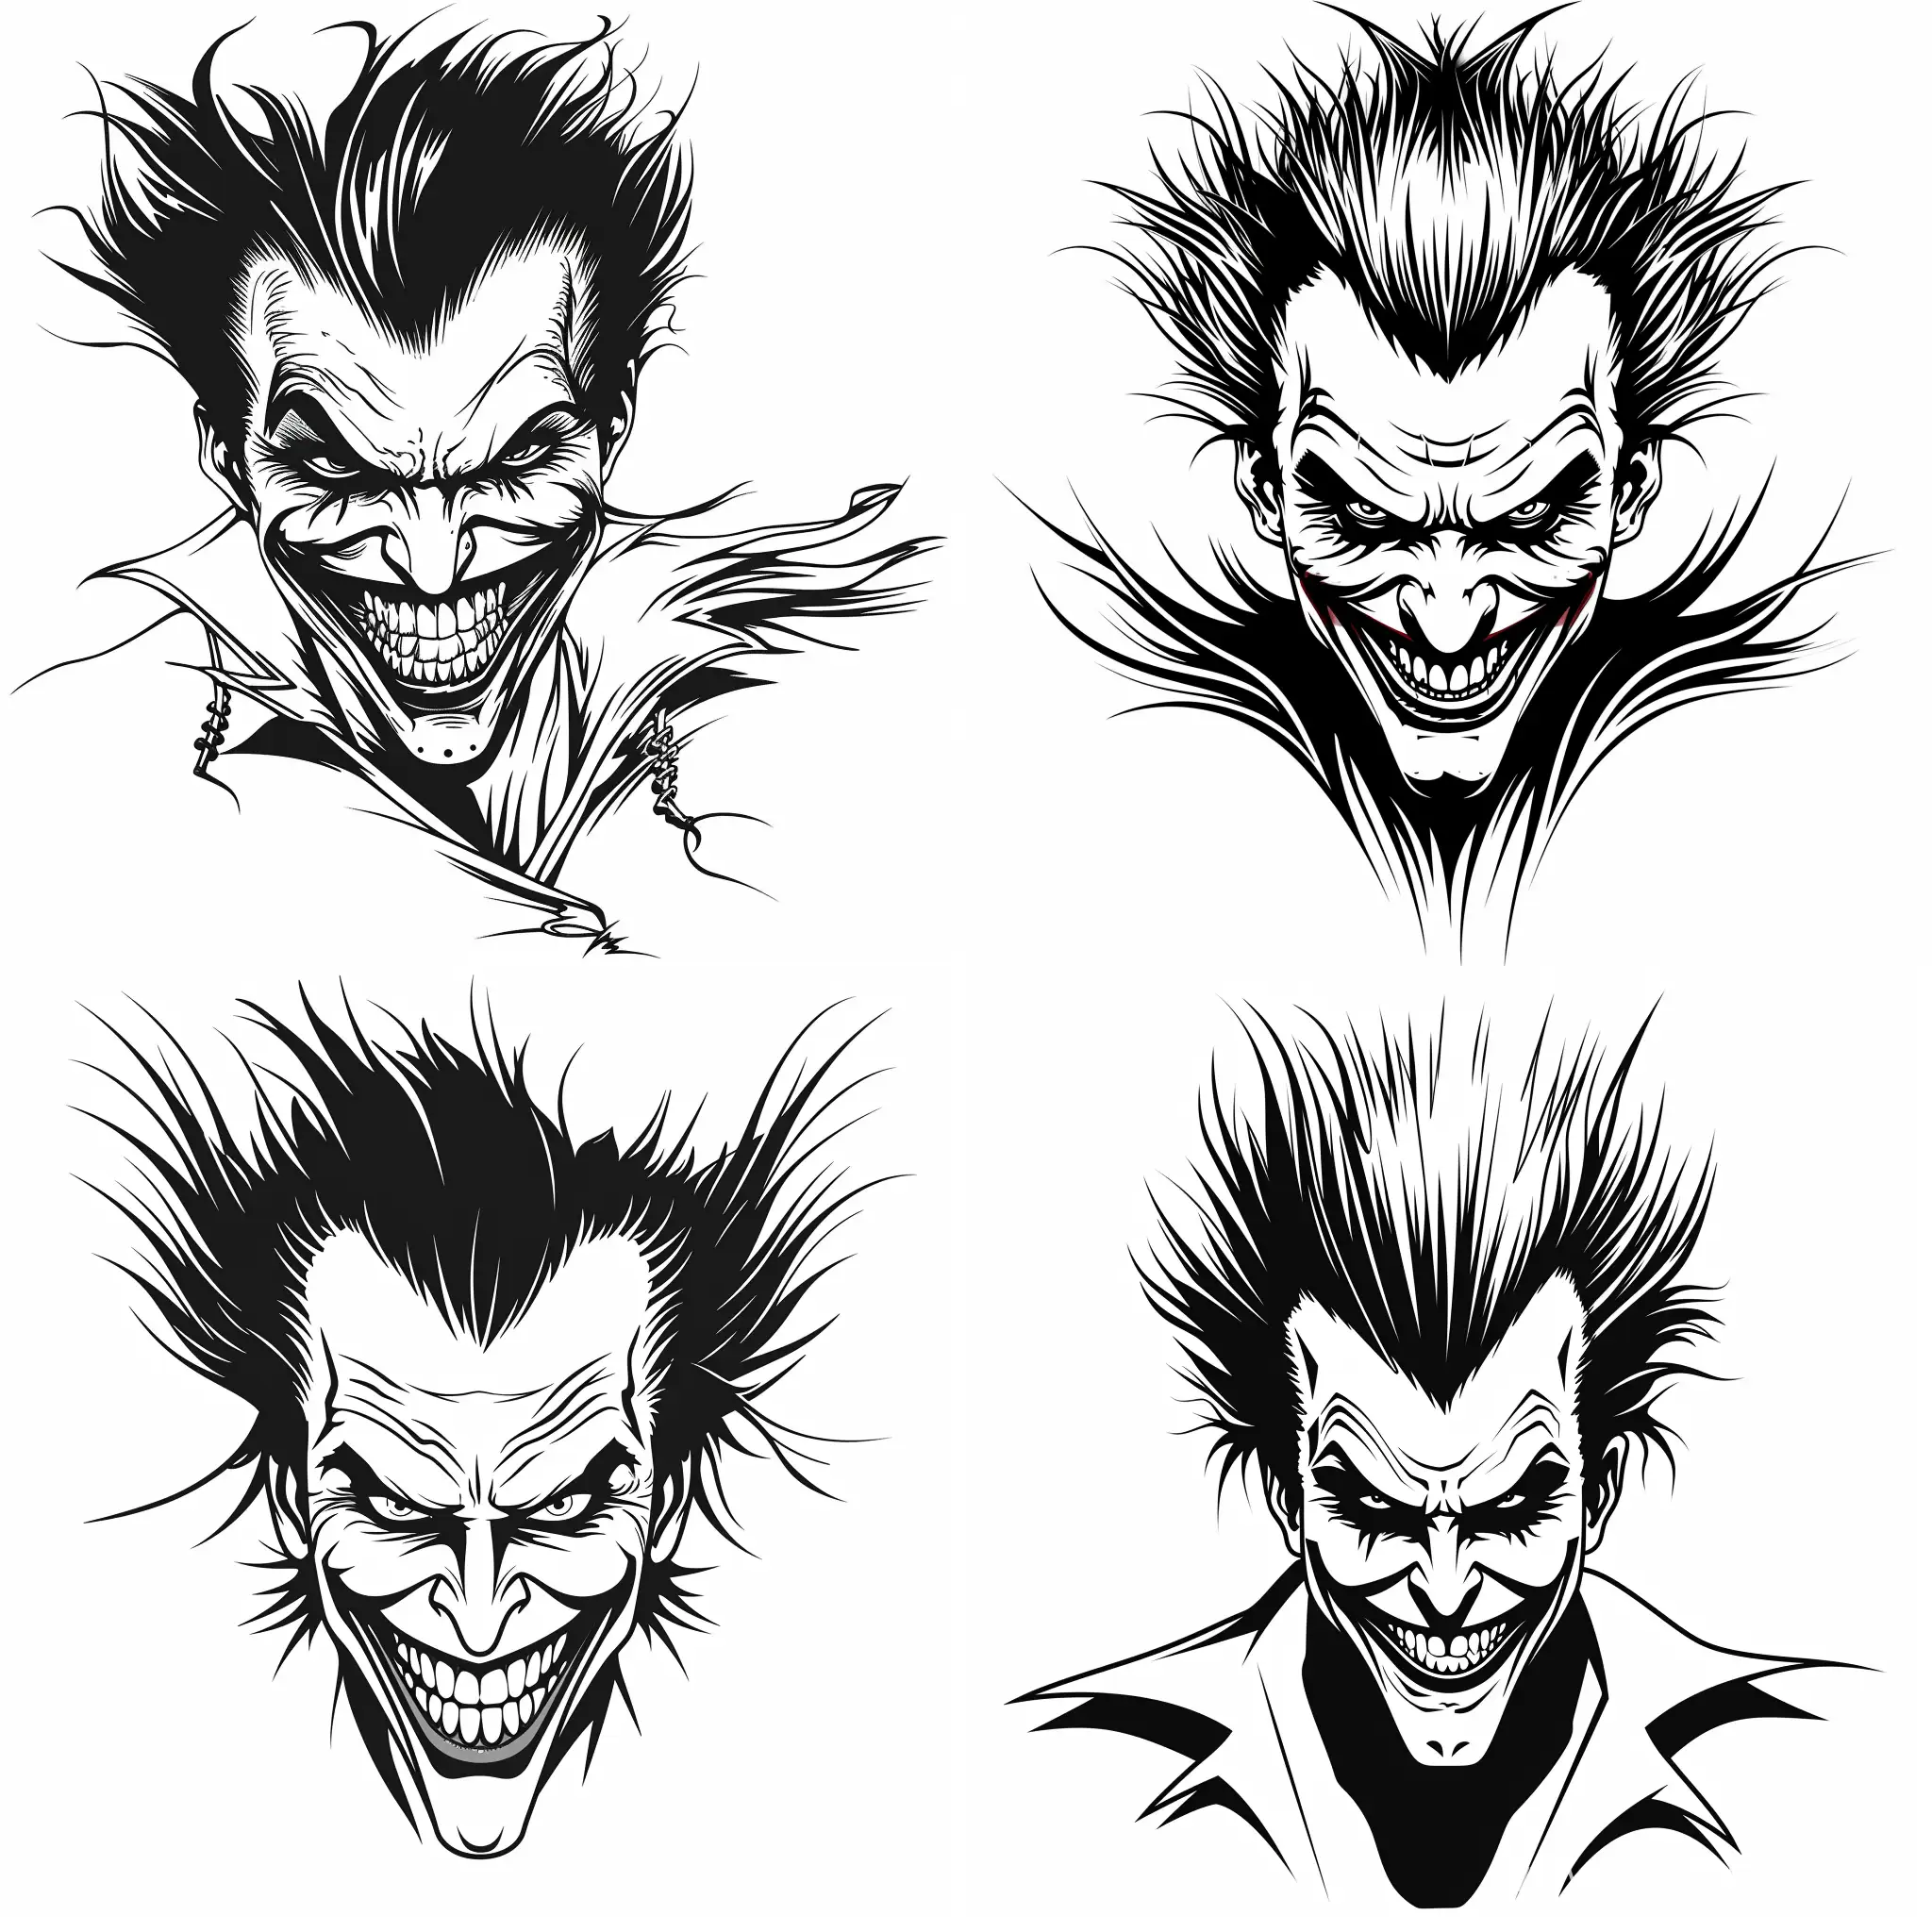 Make a simple, two-dimensional, flat vector tattoo design of a joker. There shouldn't be any gradients or shading in the design; just thick, clean lines. Concentrate simply on the joker character's outline, using only black and white and no fill. To highlight the design's simplicity, make sure the lines are crisp and distinct. Low detail should be used to depict the joker while preserving the key characteristics that make him unique. The joker's outline should be clearly seen against a stark white background.The general aesthetic should be strong and simple, appropriate for a tattoo design. The finished design should be an easy-to-understand depiction of the joker, ideal for tattoo aficionados." Please feel free to make any changes or add more information